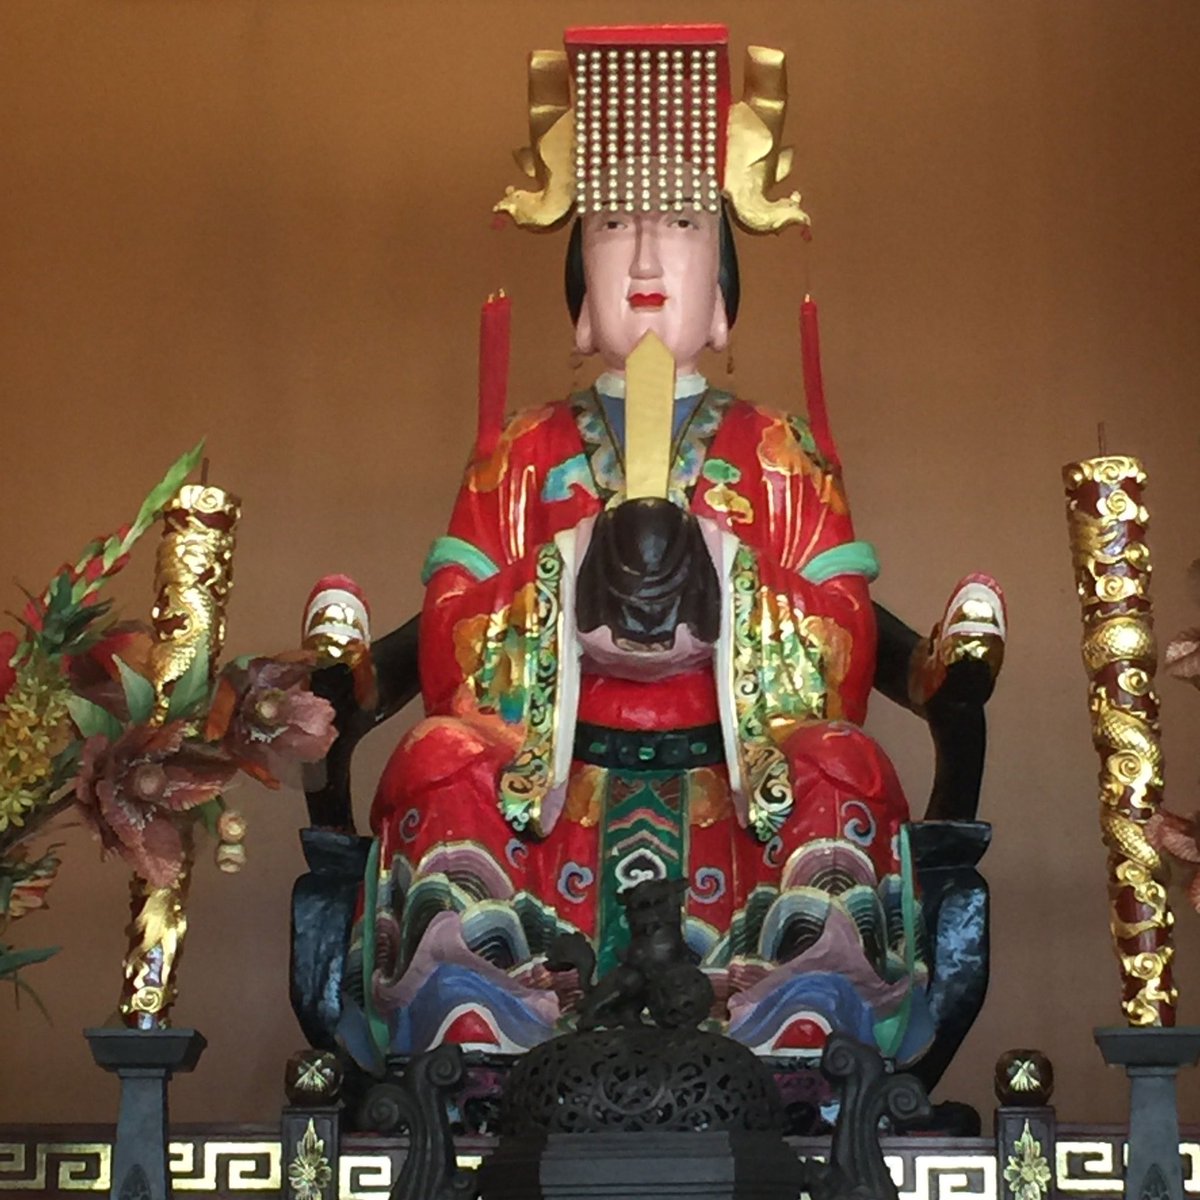 Tomorrow #fungloykok celebrates the Festival of Tin Hau. Tin Hau represents devotion, sincerity, care & protection & is known for rescuing people in distress, especially those at sea. She is particularly venerated in the coastal areas of China & by Chinese communities worldwide.